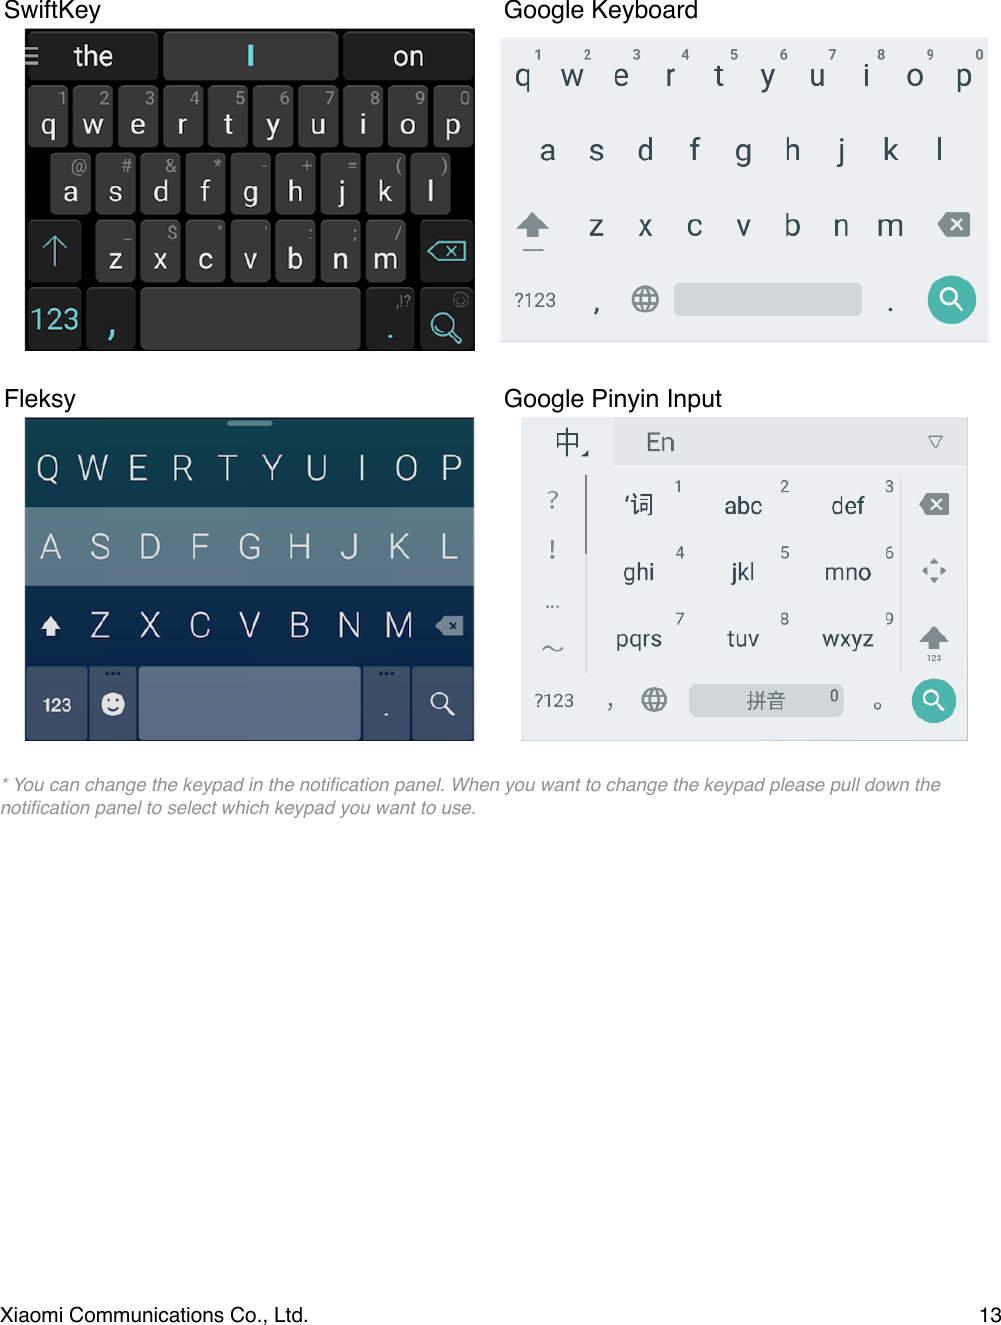 * You can change the keypad in the notiﬁcation panel. When you want to change the keypad please pull down the notiﬁcation panel to select which keypad you want to use.!SwiftKeyGoogle KeyboardFleksy Google Pinyin InputXiaomi Communications Co., Ltd.  13